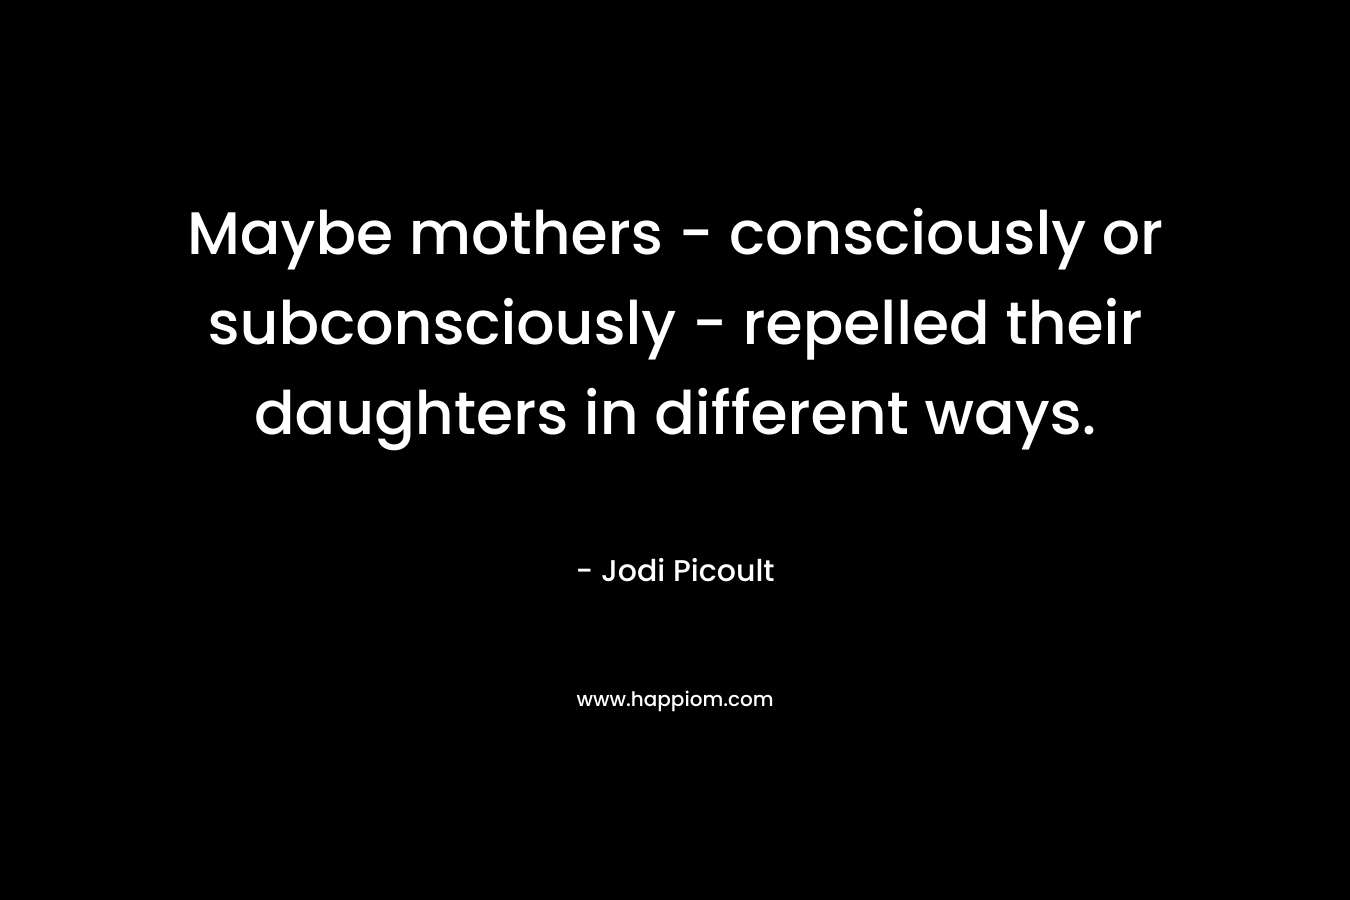 Maybe mothers - consciously or subconsciously - repelled their daughters in different ways.